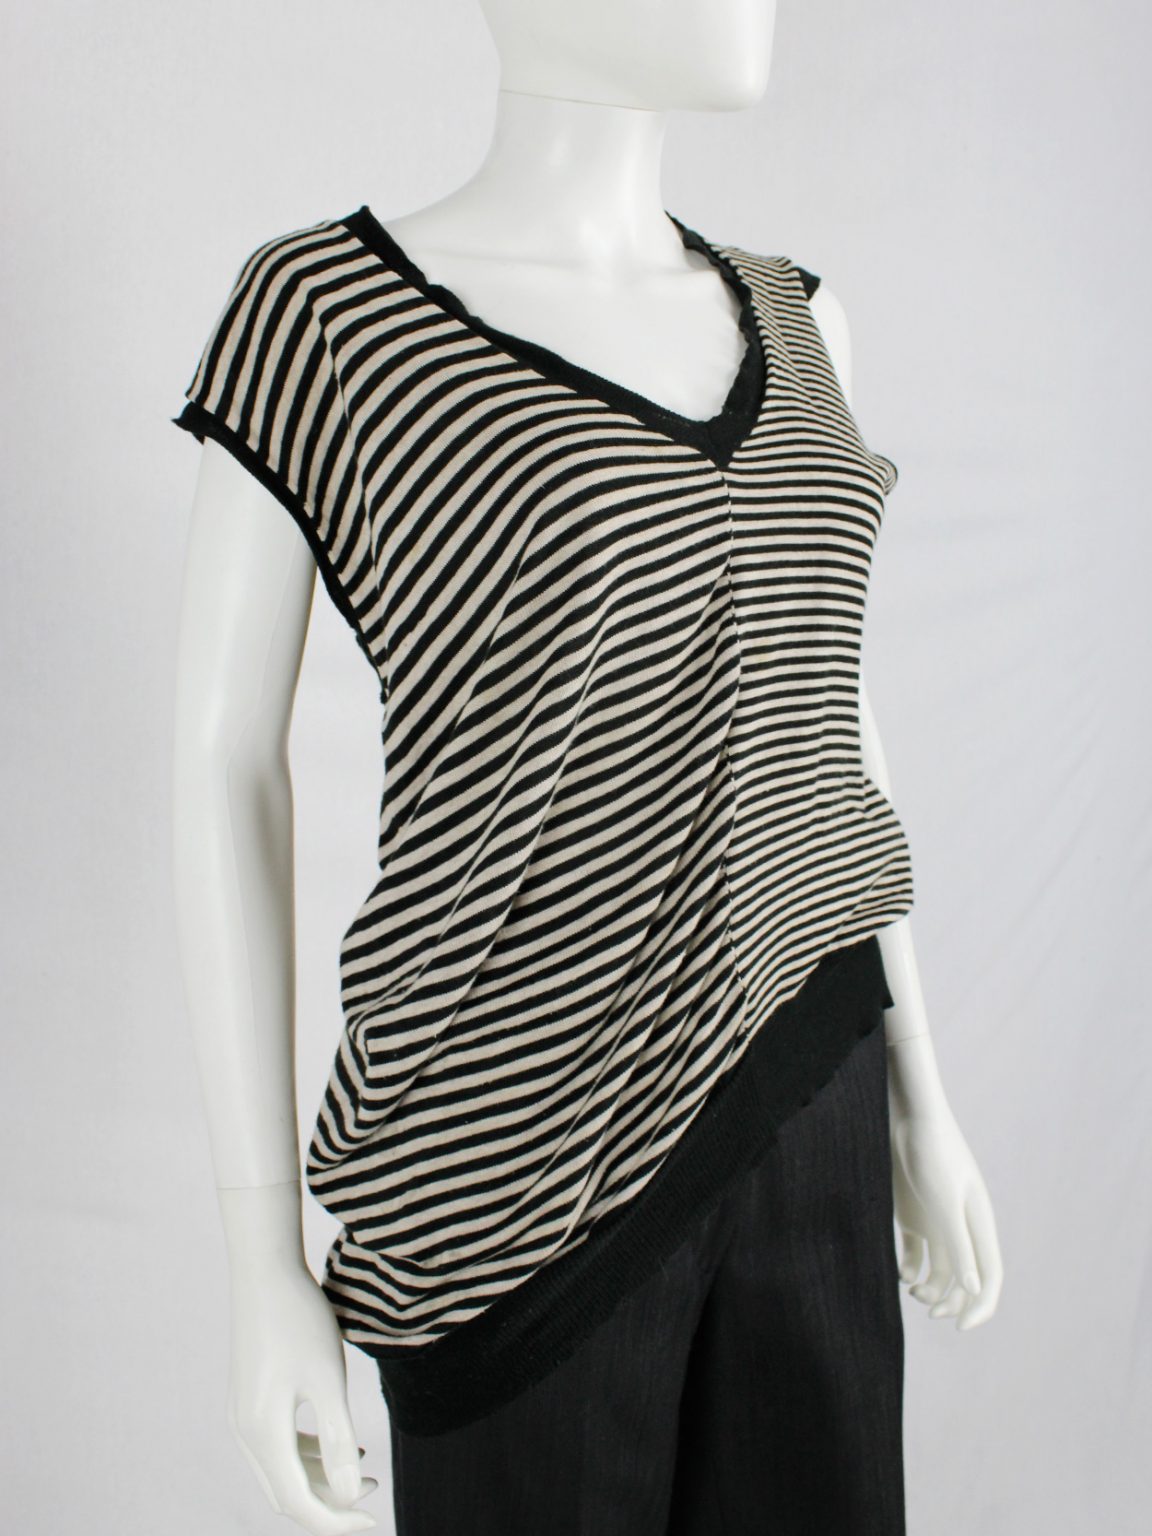 Maison Martin Margiela beige and black striped top, stretched out on one side — spring 2005